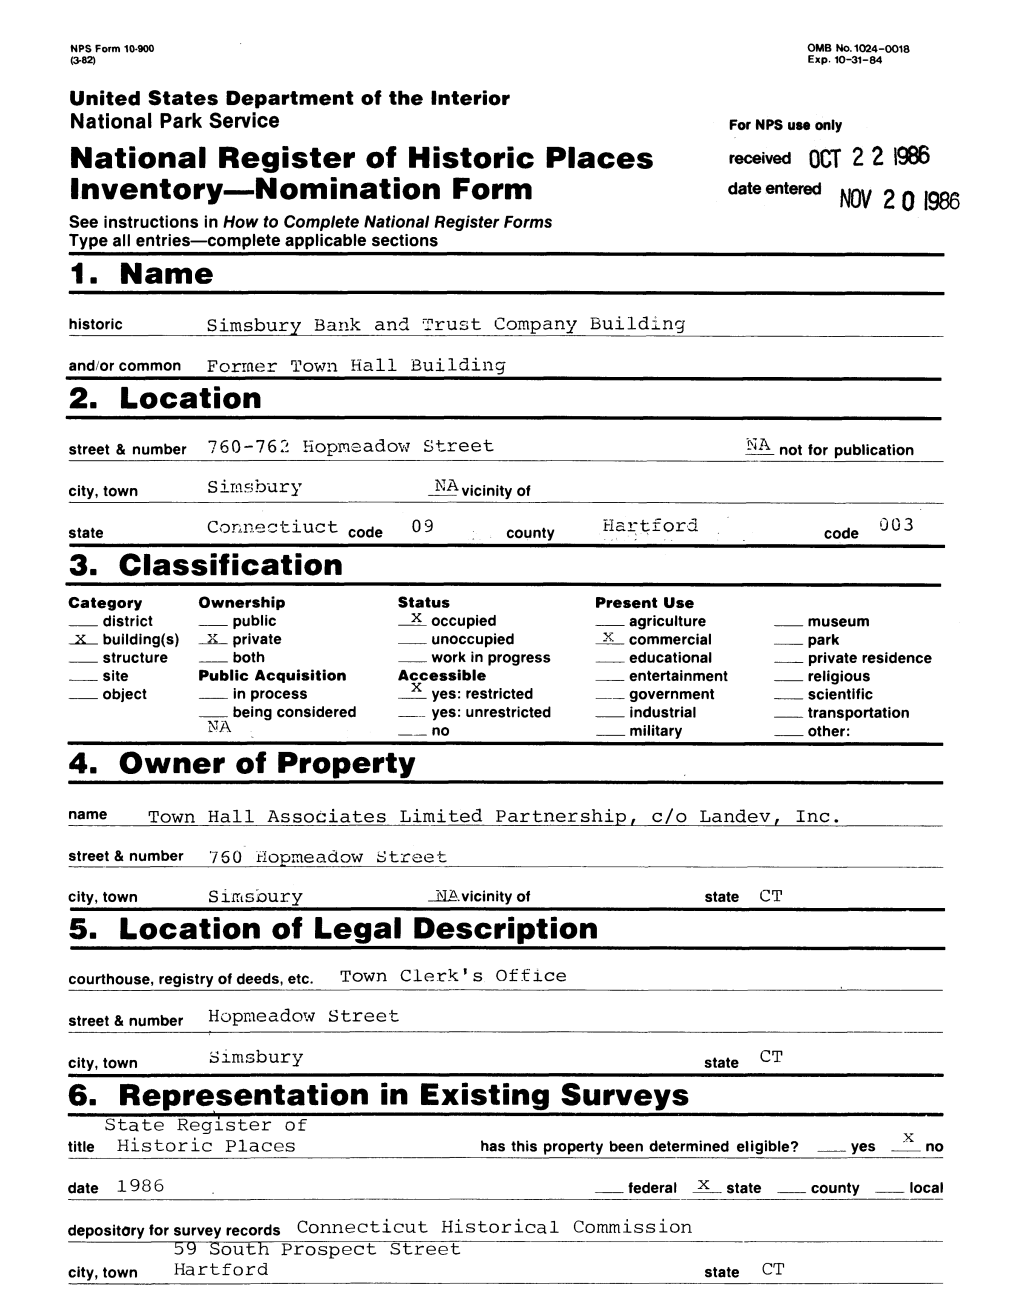 National Register of Historic Places Inventory Nomination Form Date Entered ^201986 1. Name 2. Location 3. Classification 4